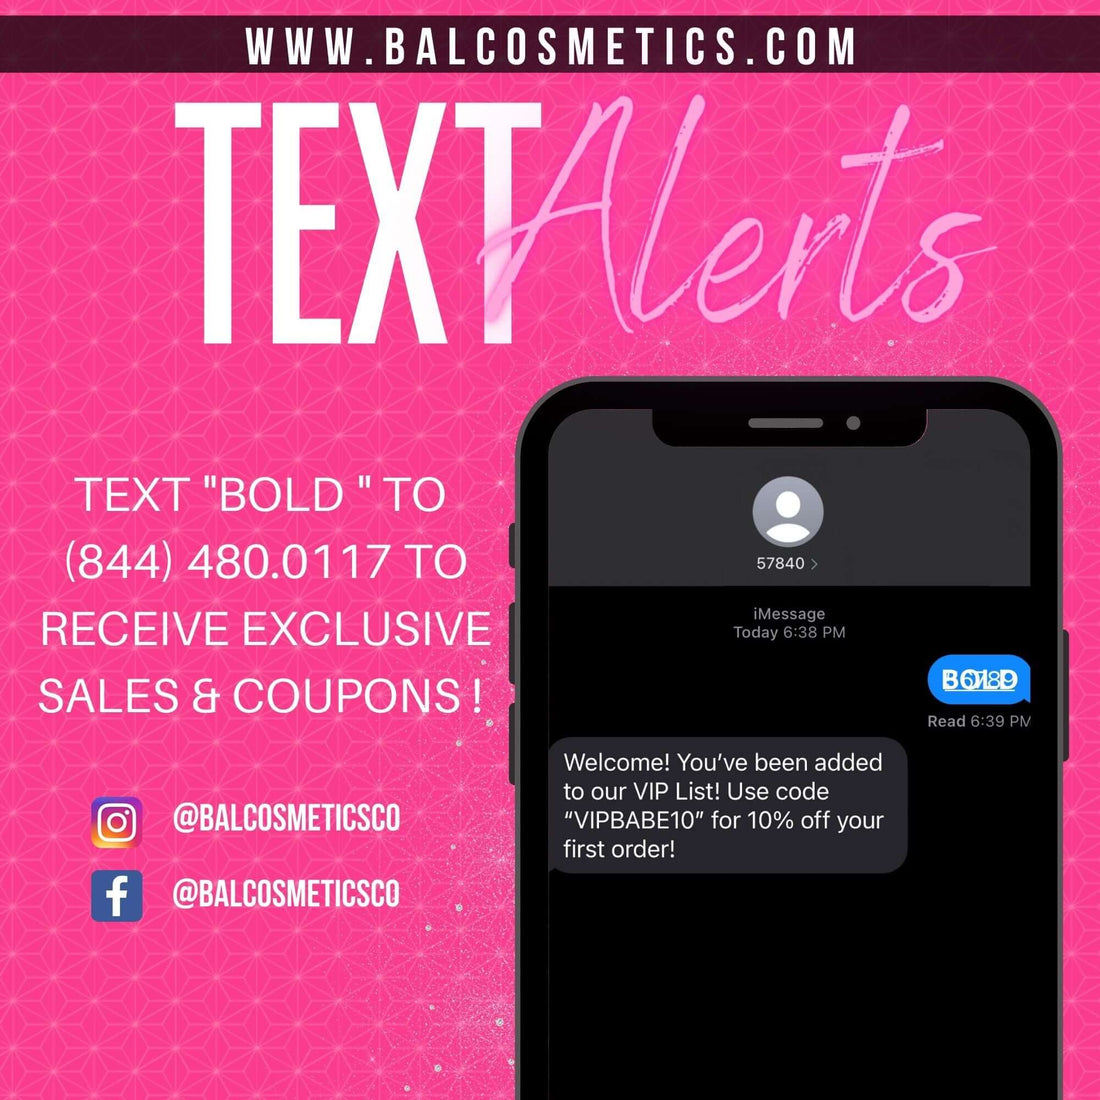 TEXT ALERTS COMING SOON!